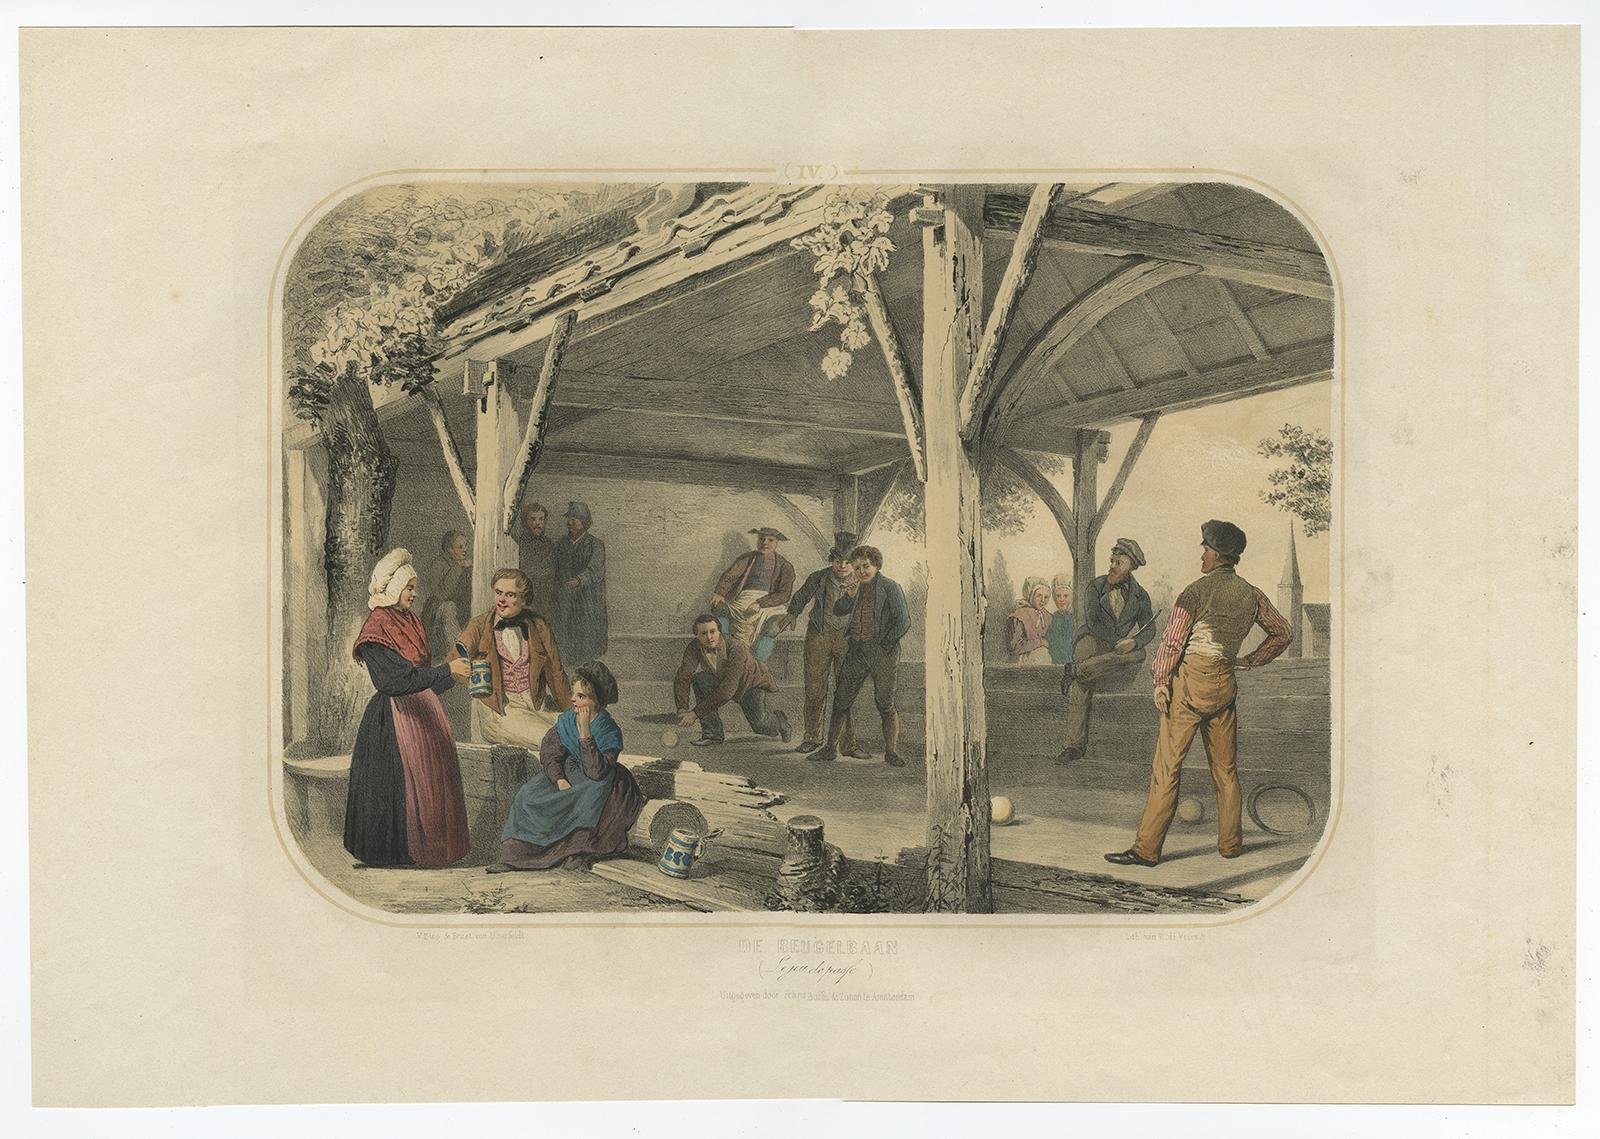 Antique print titled 'Plate IV 'De Beugelbaan - Le Jeu de Passe.' 

This plate shows a 19th century scene in Noord-Brabant, The Netherlands. Men are playing the Dutch game 'beugelen'. This original antique print was published in 1857 by Frans